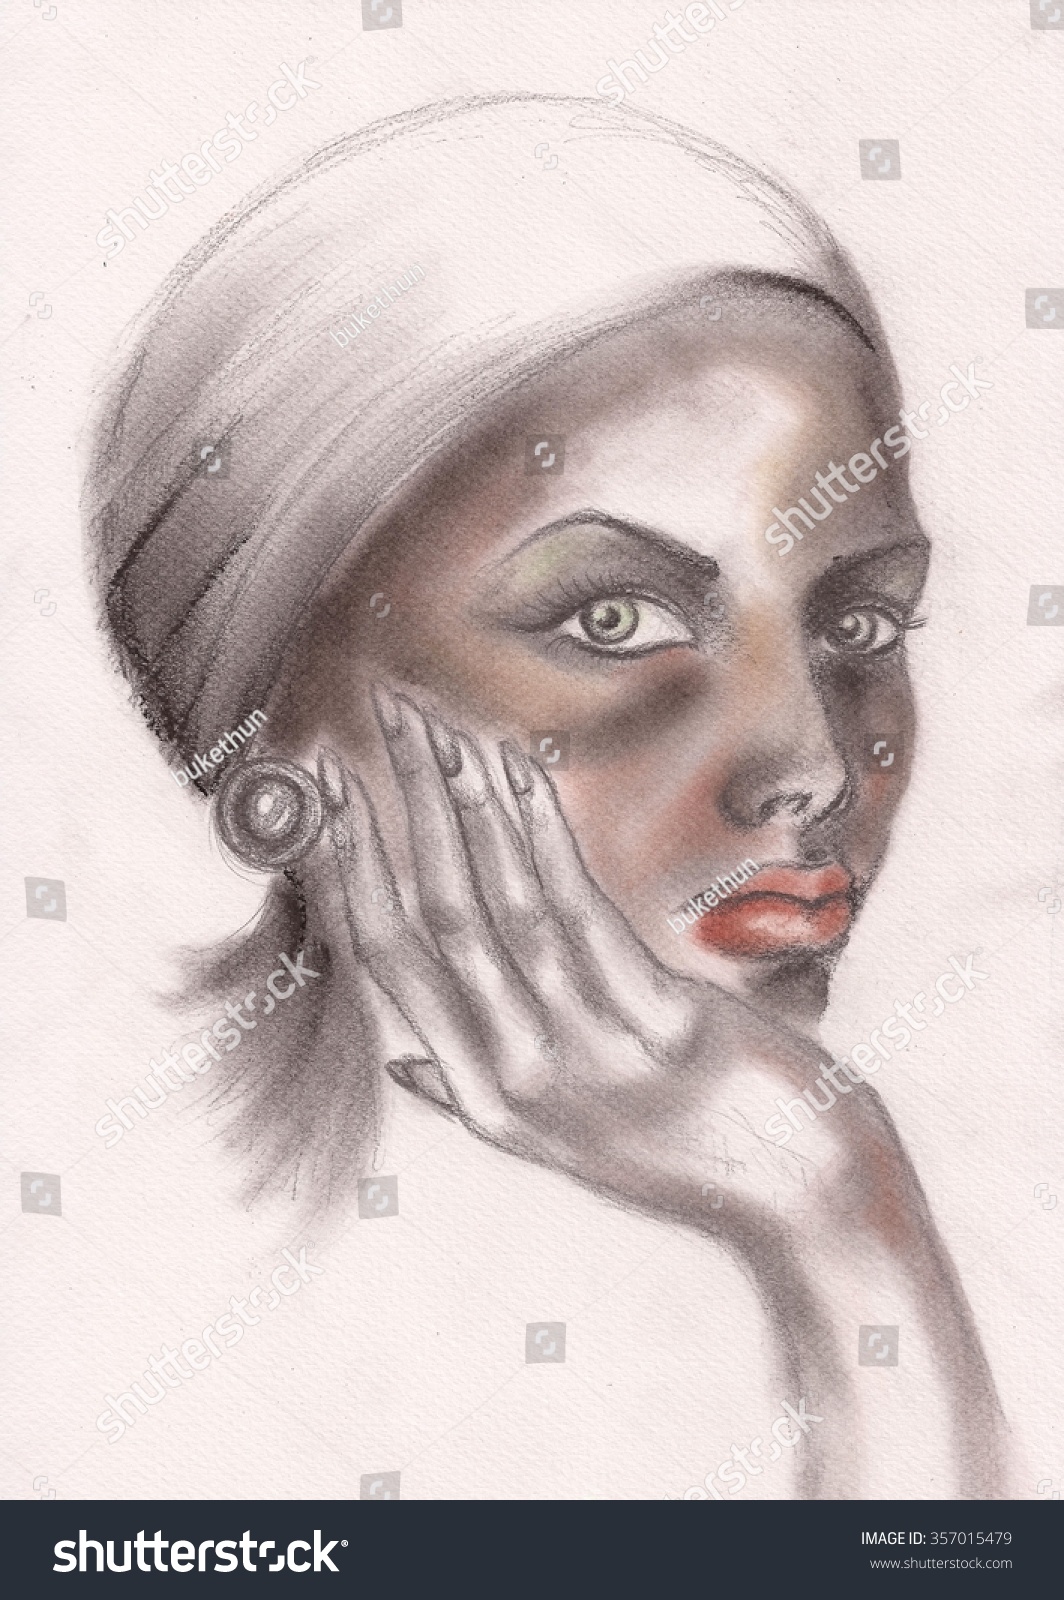 Pastel drawinghand drawn portraitdrawing in pastelportrait in colorportrait from photo